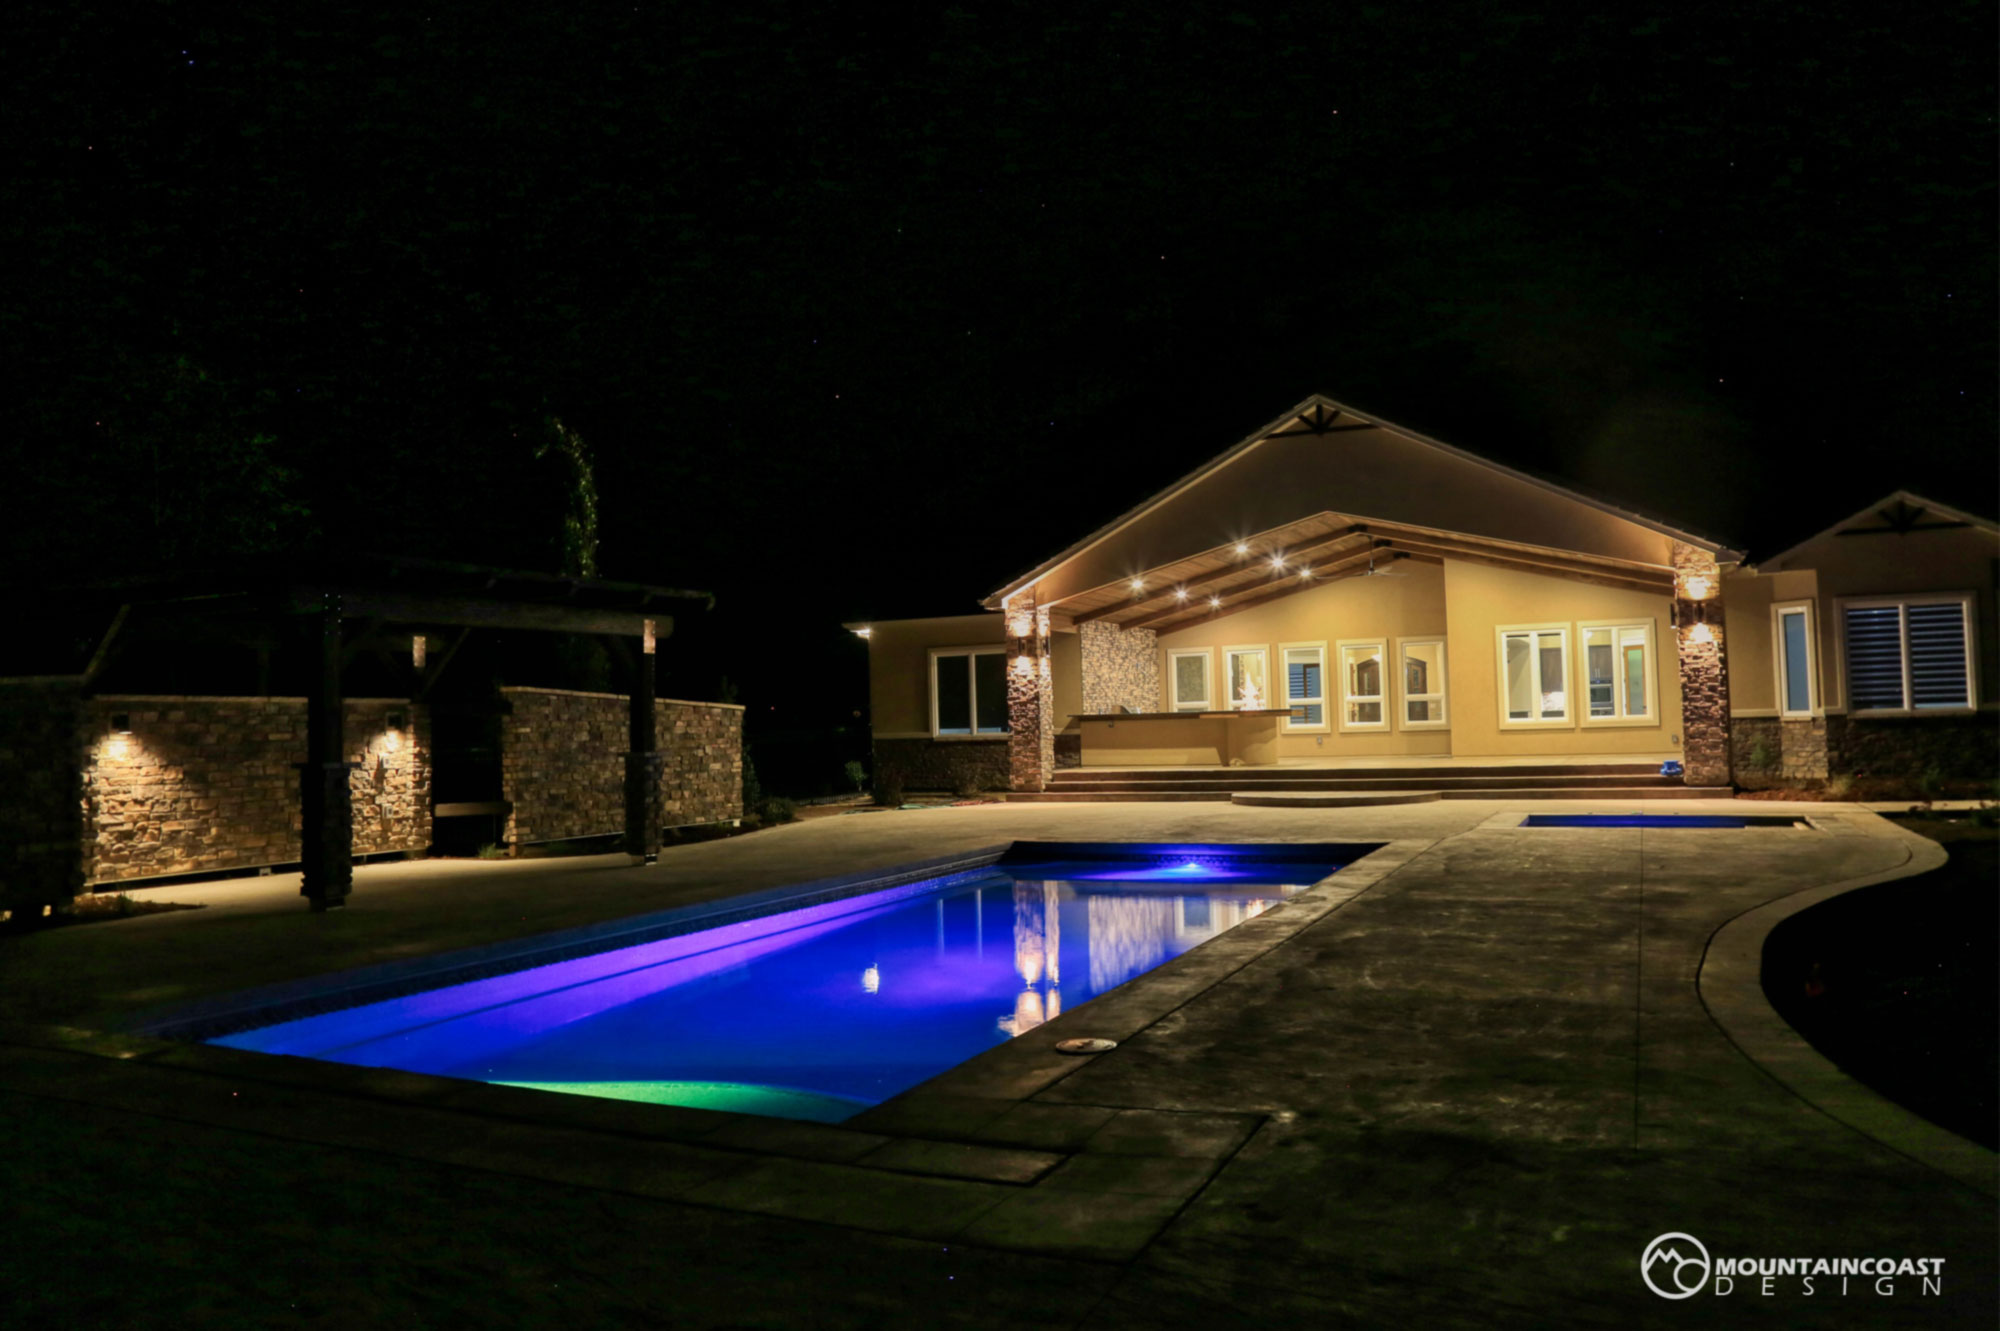 Pool and House at night.